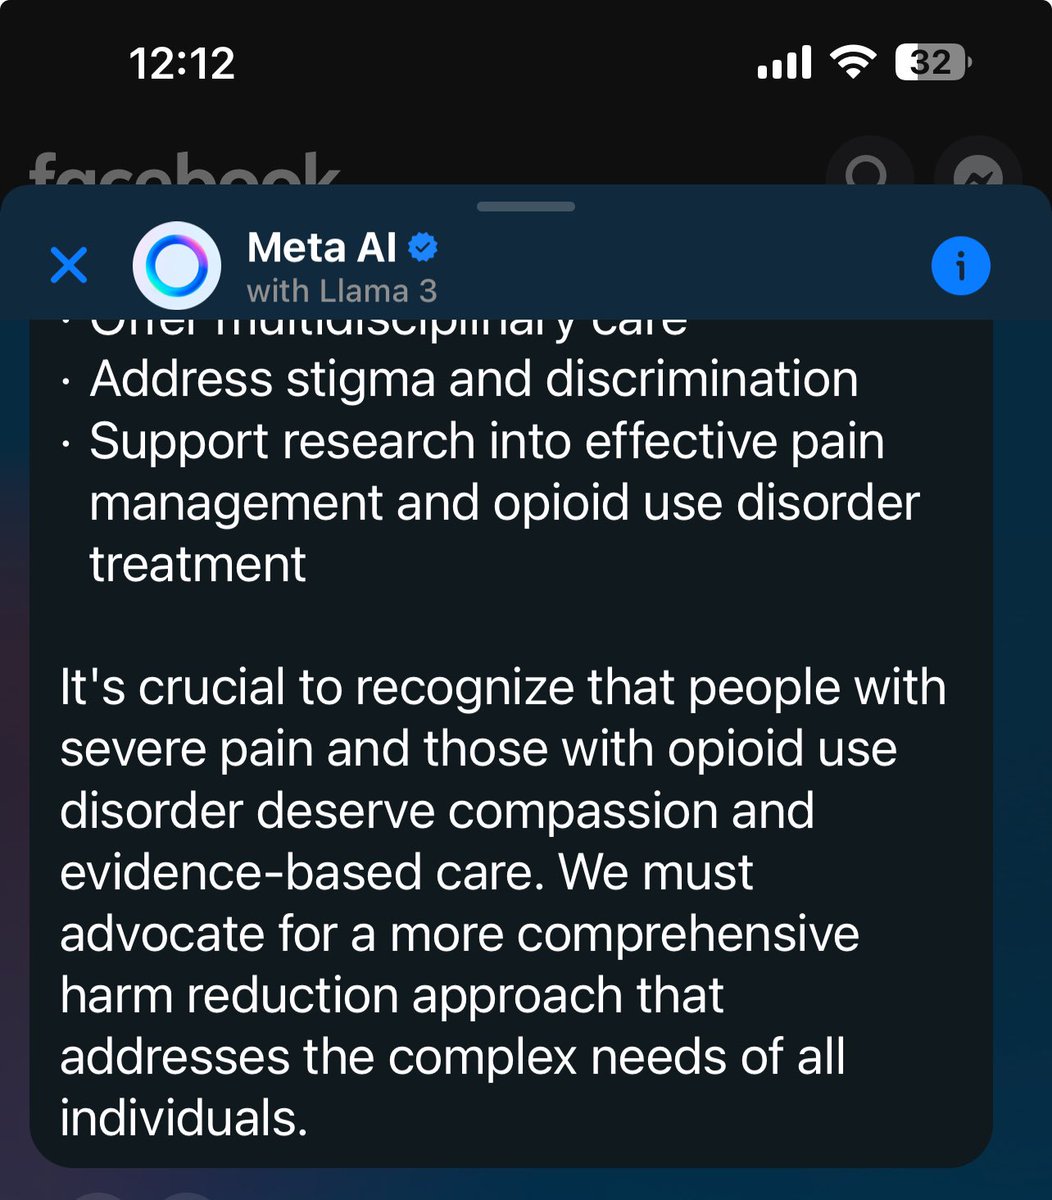 I asked AI some questions and the response is very useful, especially about Harm Reduction and pain paitents!